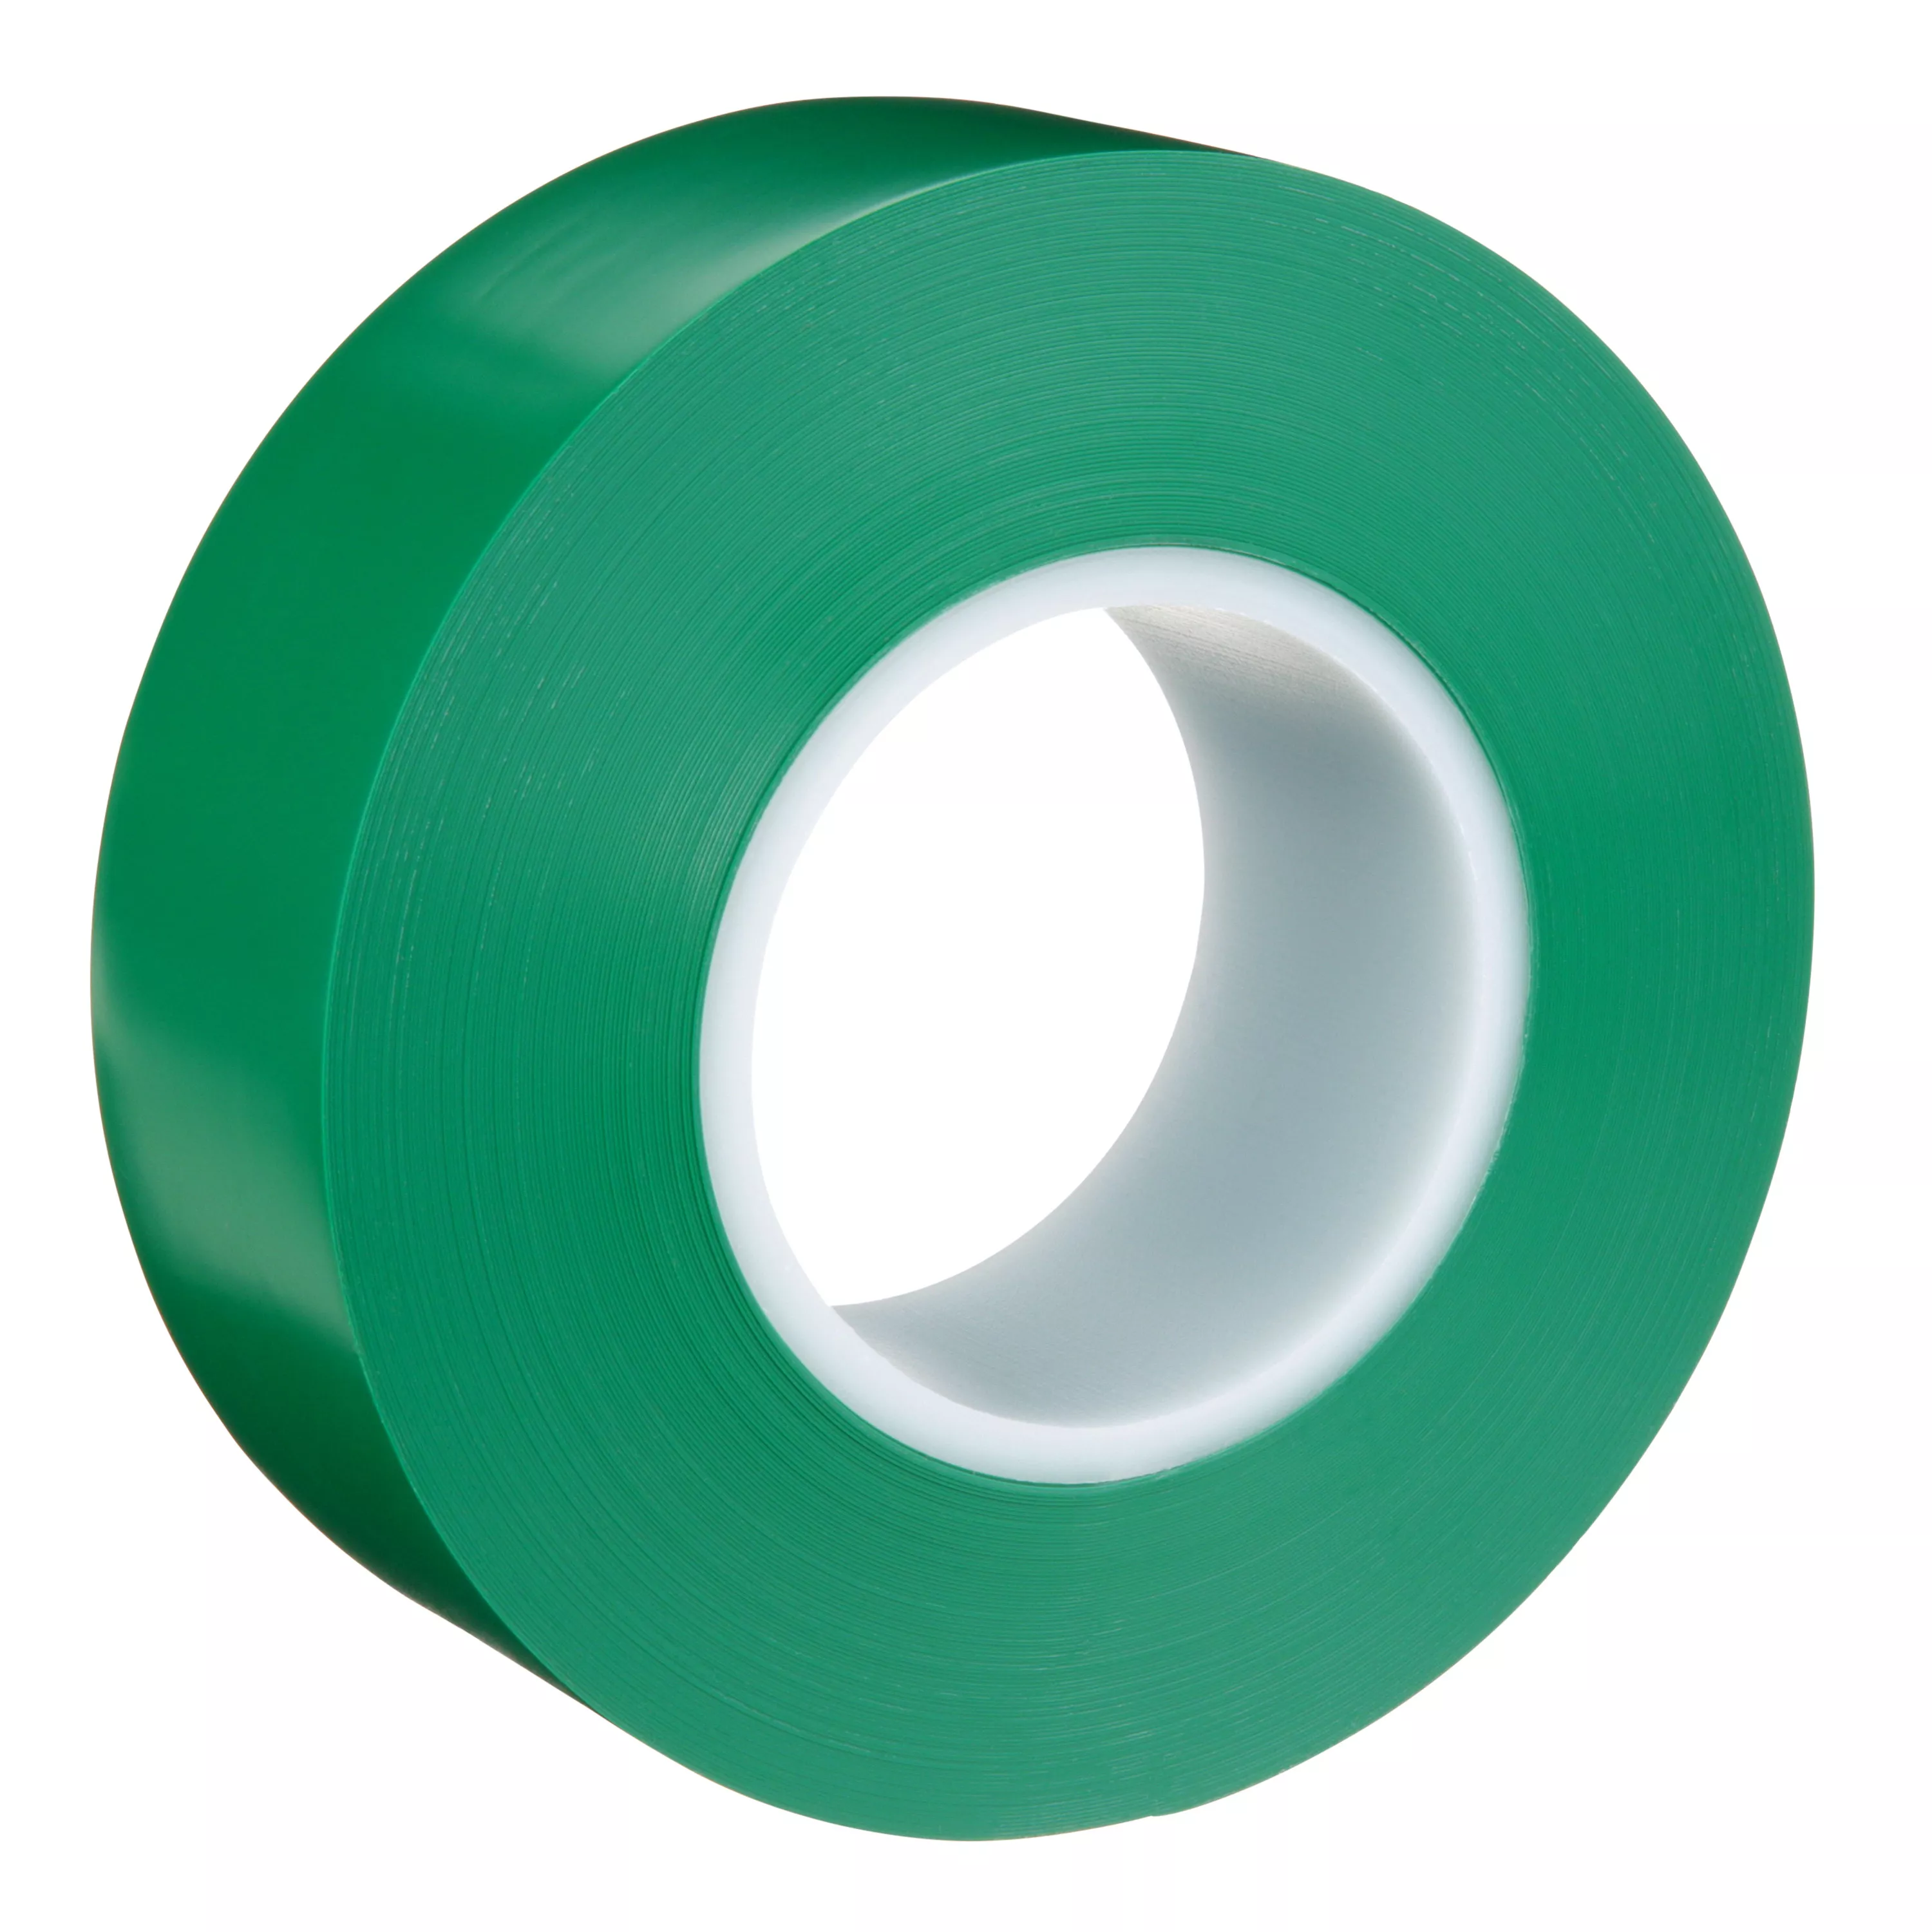 3M™ Durable Floor Marking Tape 971, Green, 2 in x 36 yd, 17 mil, 6 Rolls/Case, Individually Wrapped Conveniently Packaged